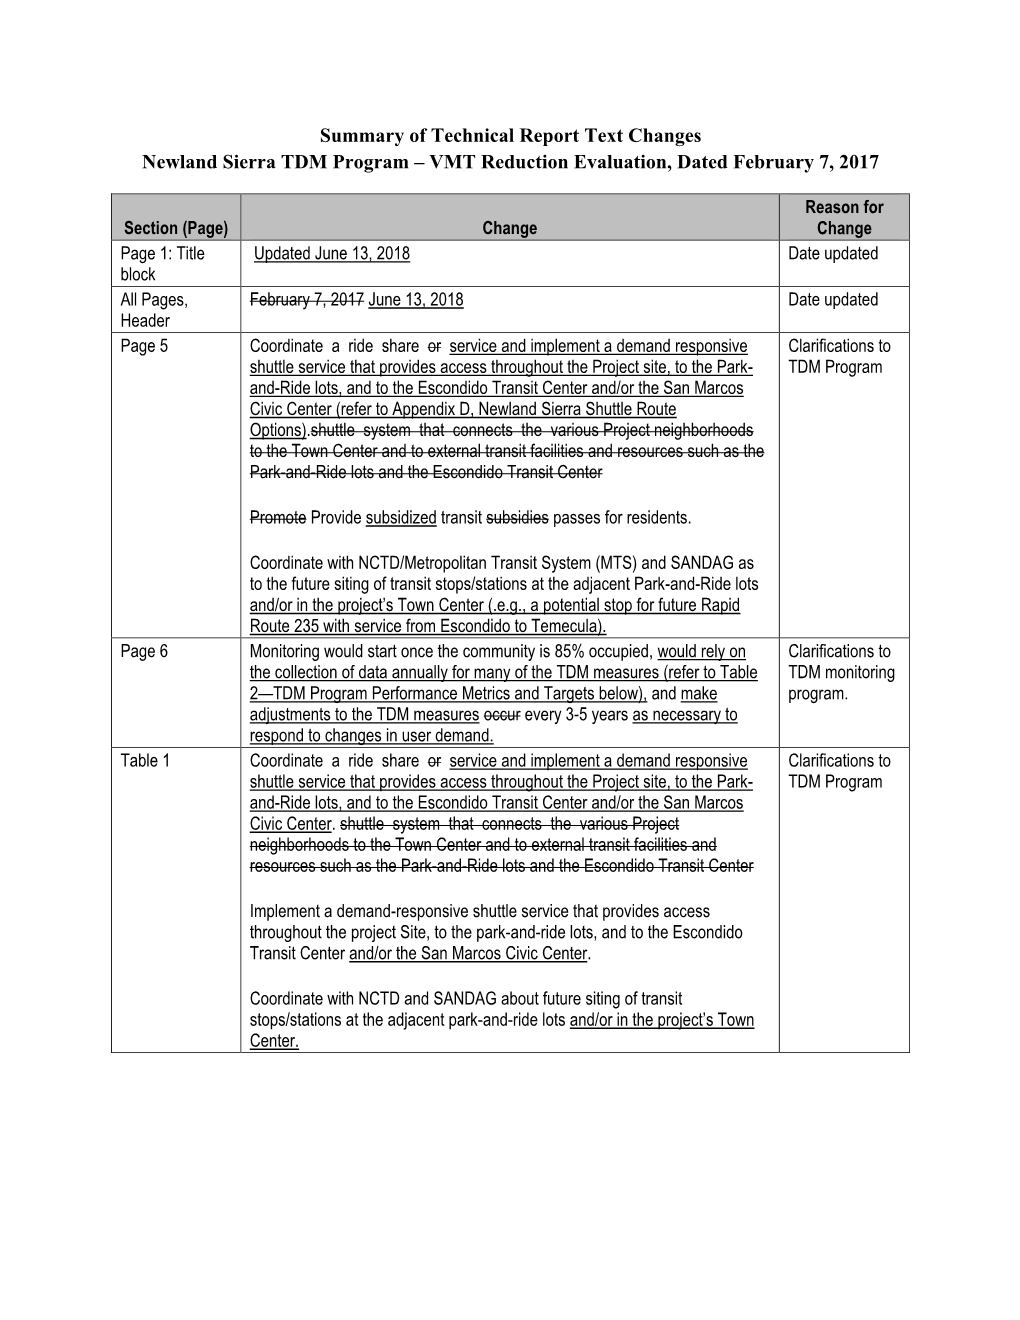 Summary of Technical Report Text Changes Newland Sierra TDM Program – VMT Reduction Evaluation, Dated February 7, 2017